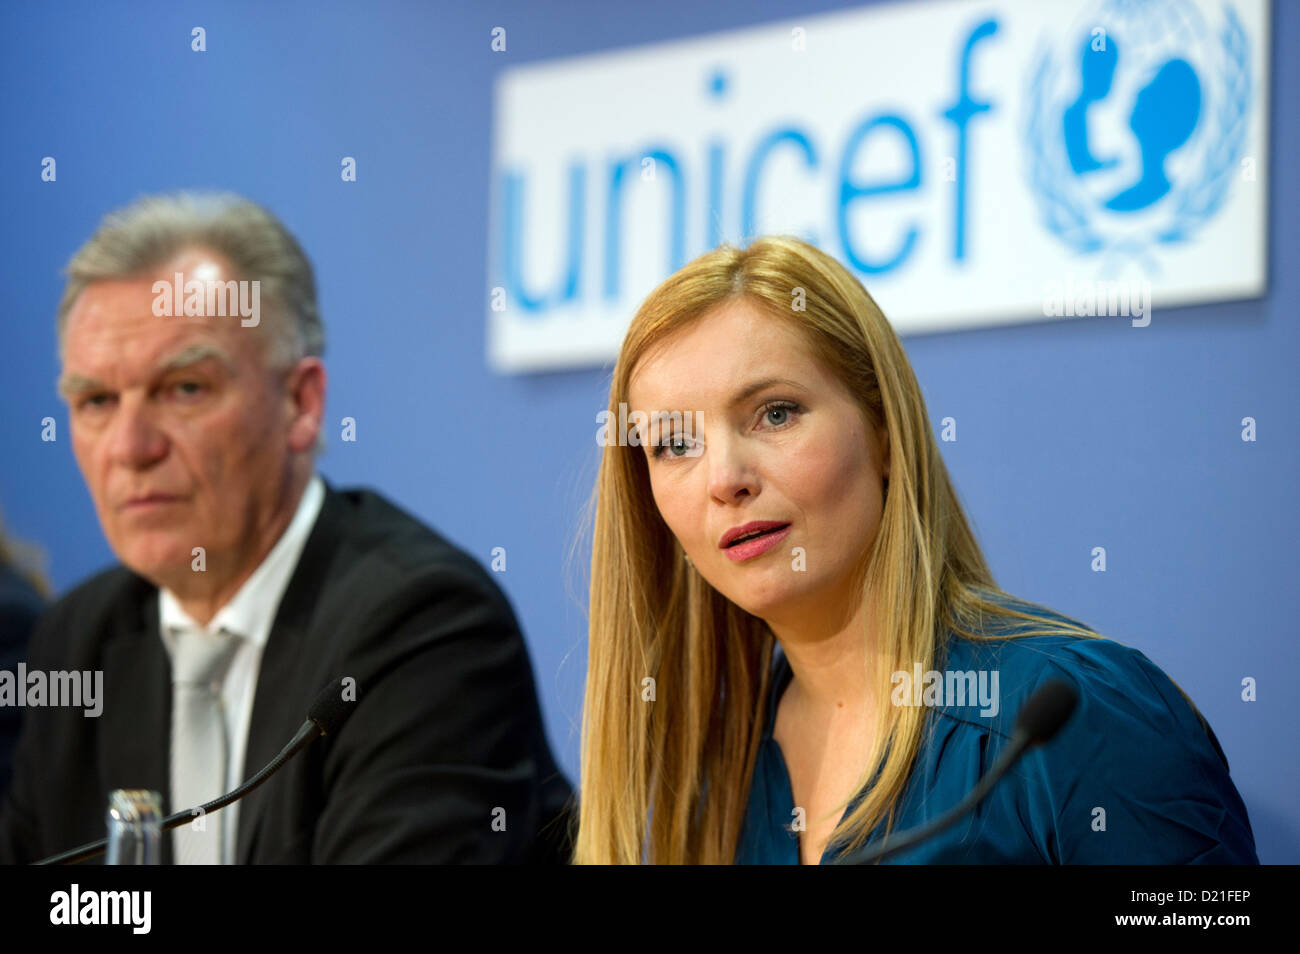 Actress Nadja Uhl (C) sits next to President of the German Federal Criminal Police Office Joerg Ziercke during a press conference in Berlin, Germany, 10 January 2013. For the broadcast of the television film 'Operation Zucker' (16 January) about human trafficking and child abuse, Ziercke is discussing the topic in relation to Germany. Uhl, who went to Romania to do research for the production, ivestigated child traffickers in Berlin in the movie. Photo: MARC TIRL Stock Photo